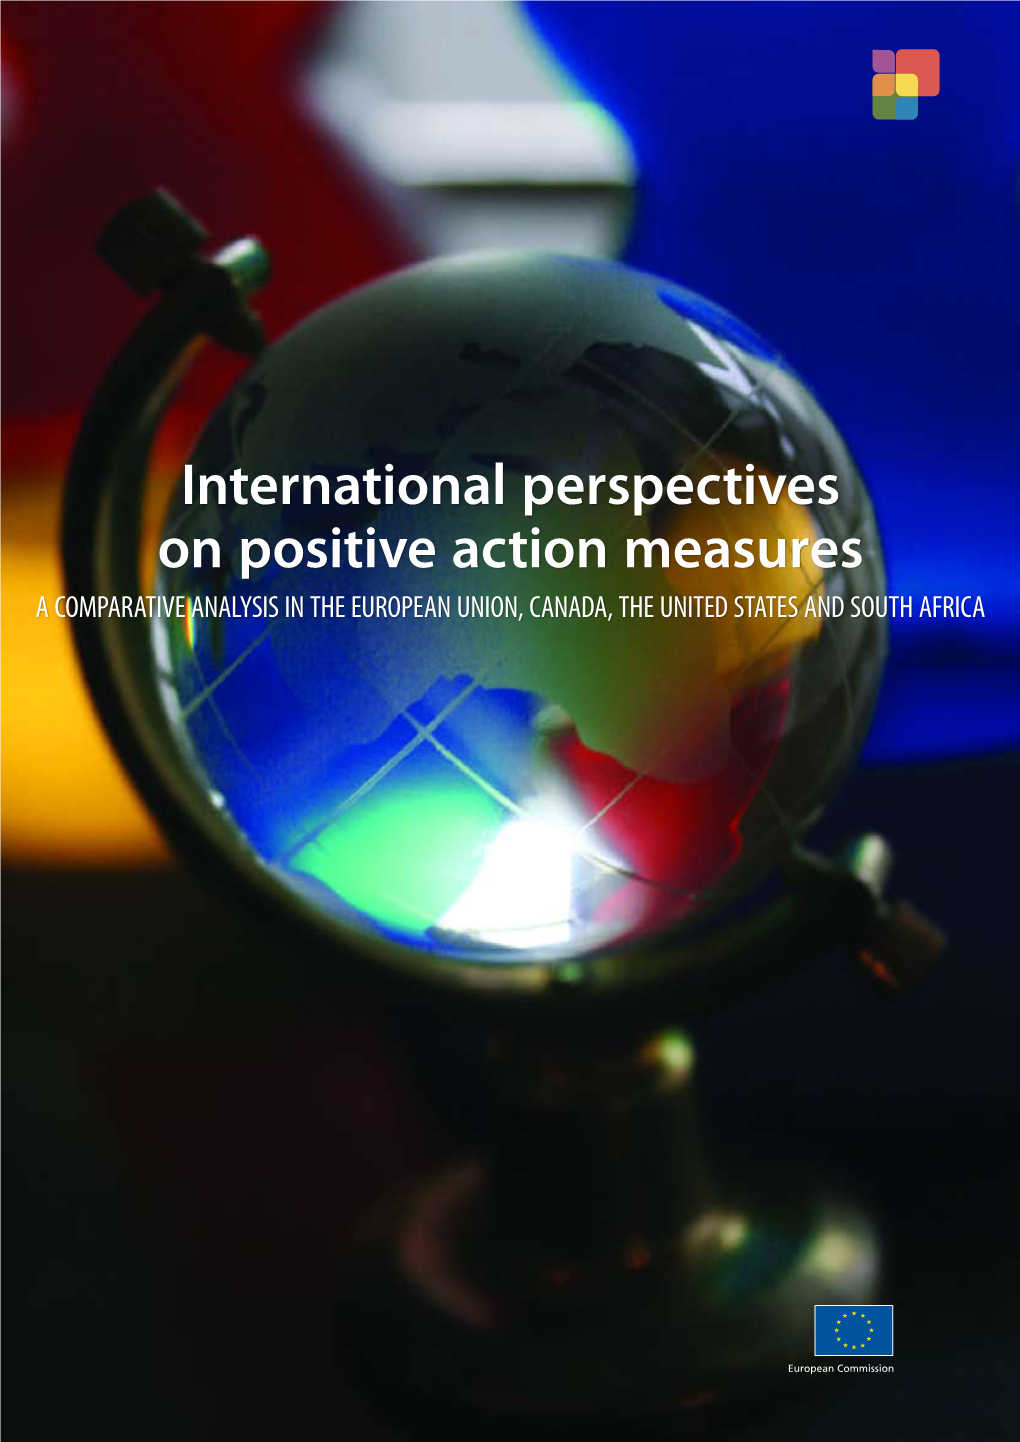 International Perspectives on Positive Action Measures a COMPARATIVE ANALYSIS in the EUROPEAN UNION, CANADA, the UNITED STATES and SOUTH AFRICA